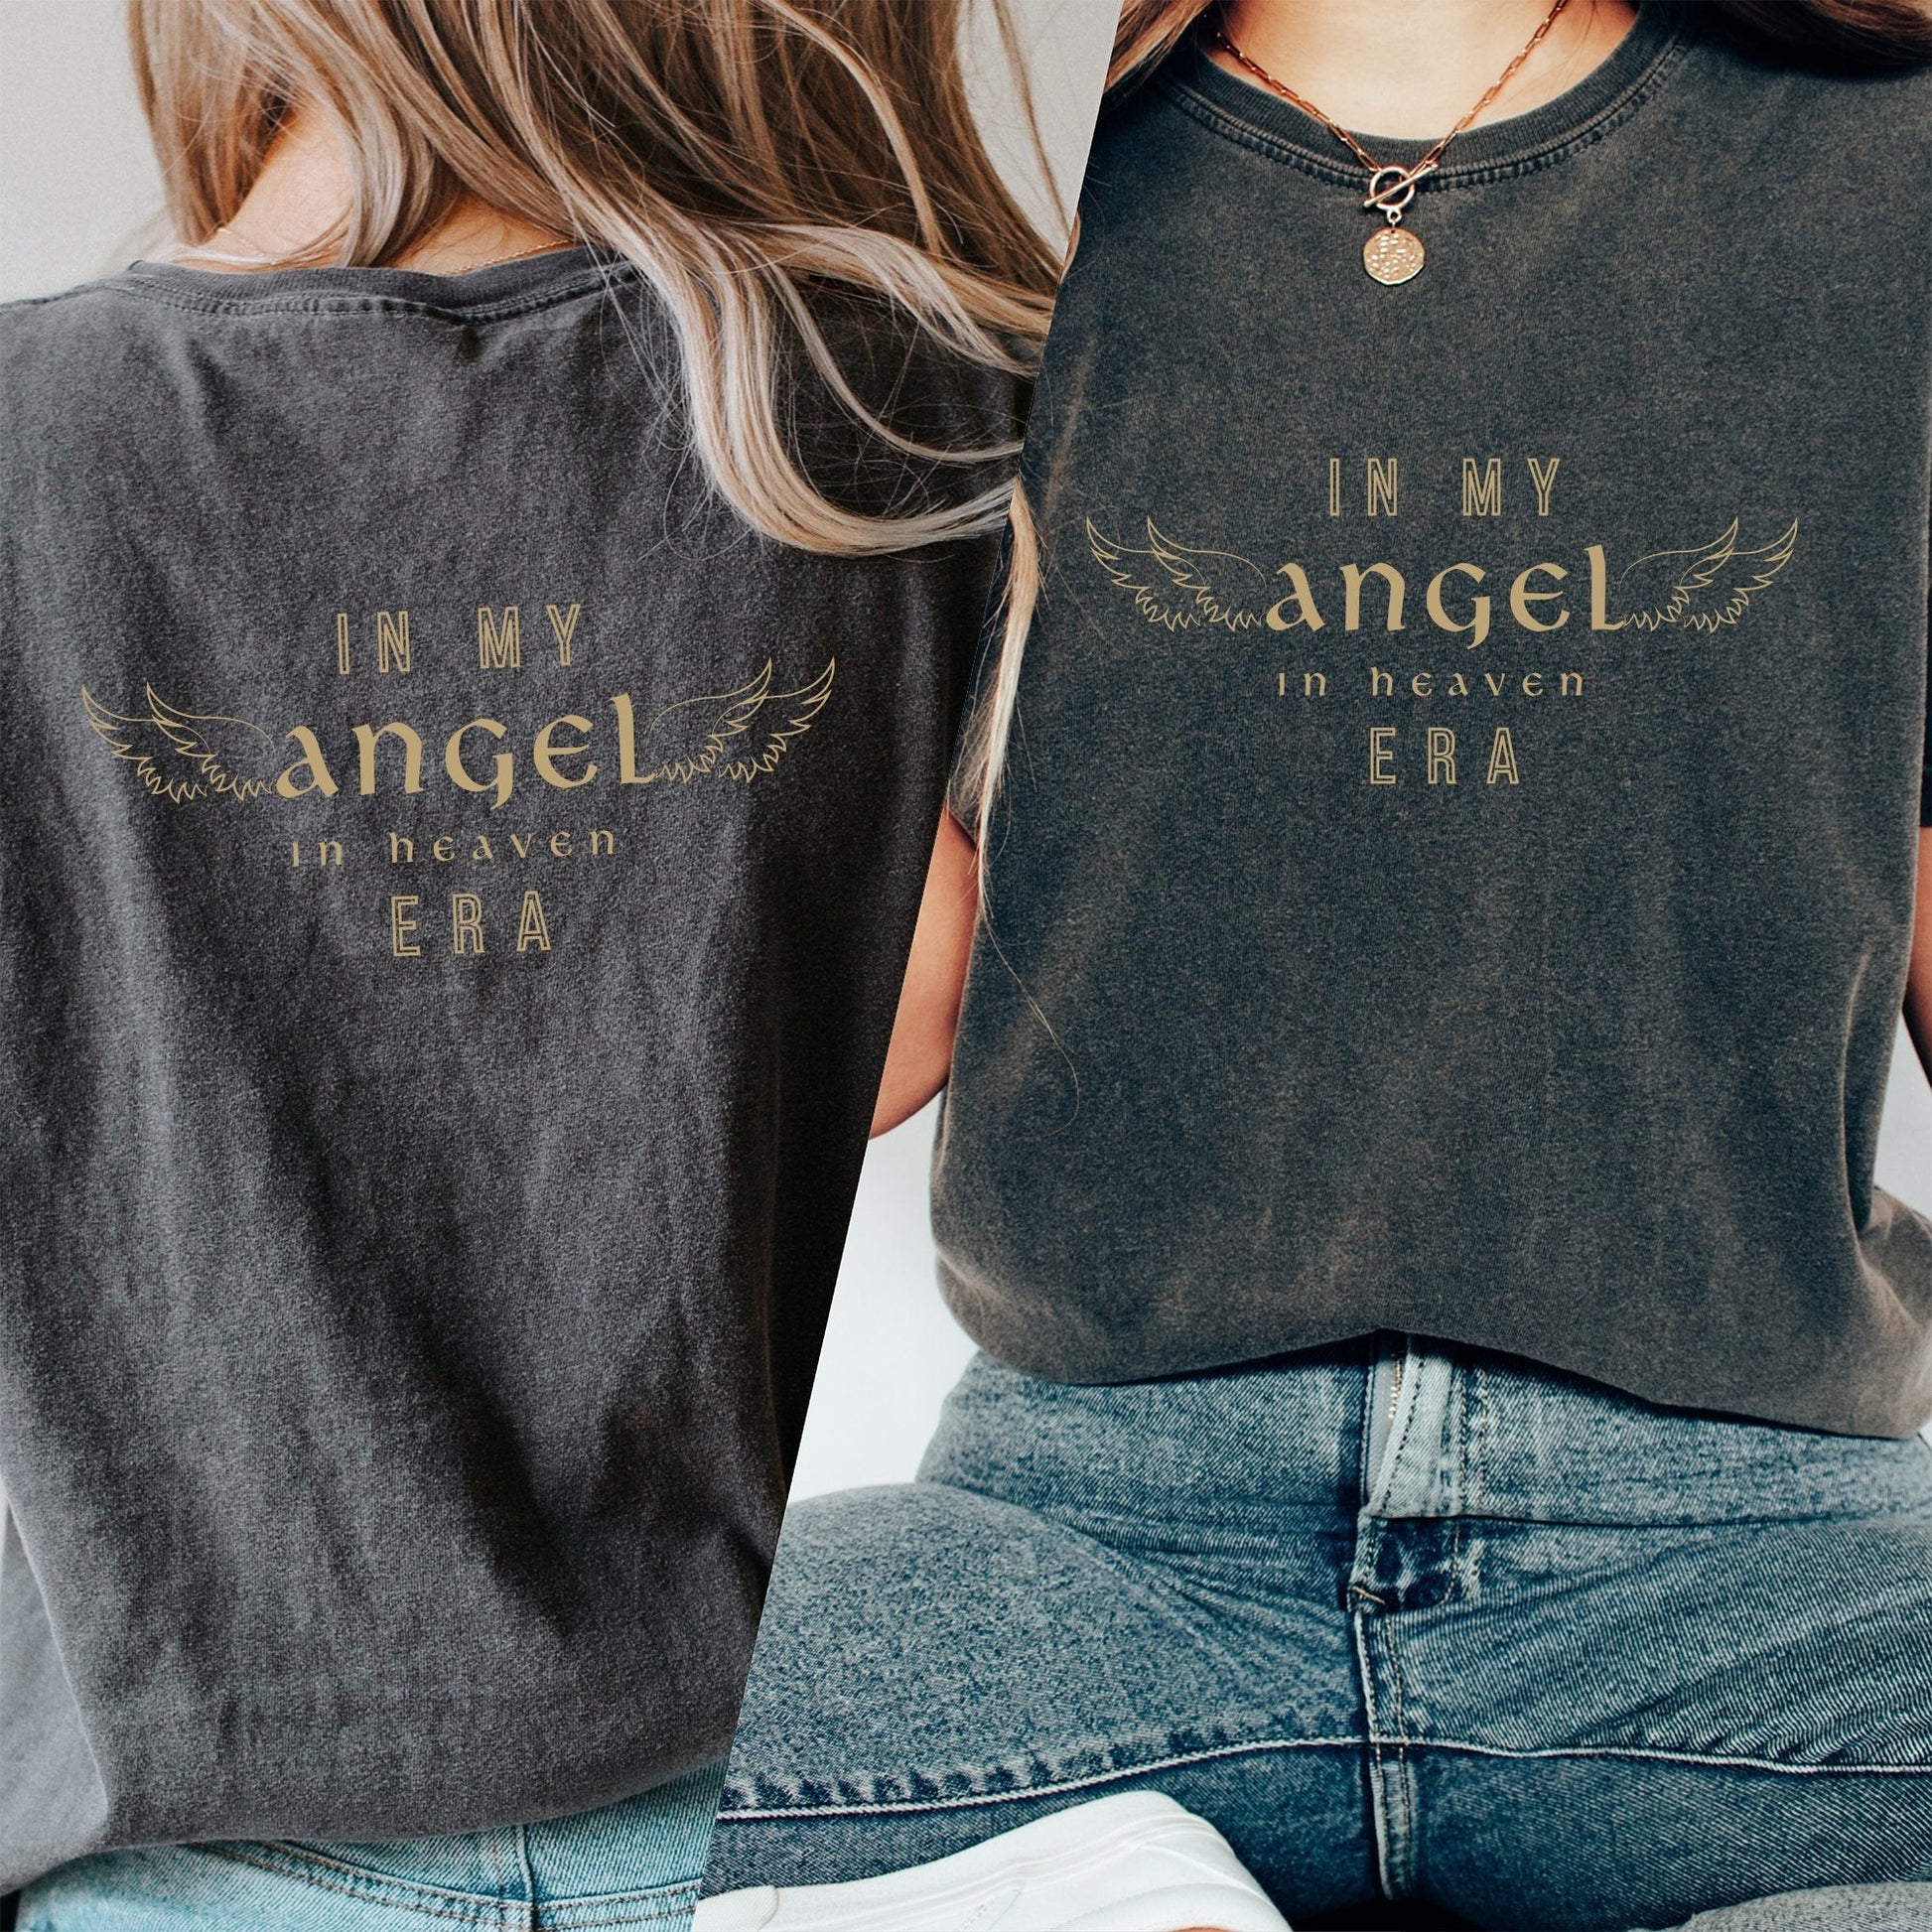 In My Angel In Heaven Edgar Allan Poe T Shirt Cool Literary Gift For Book Lovers Tee XS-4XL Birthday Gift For Him or Her - AFADesignsCo